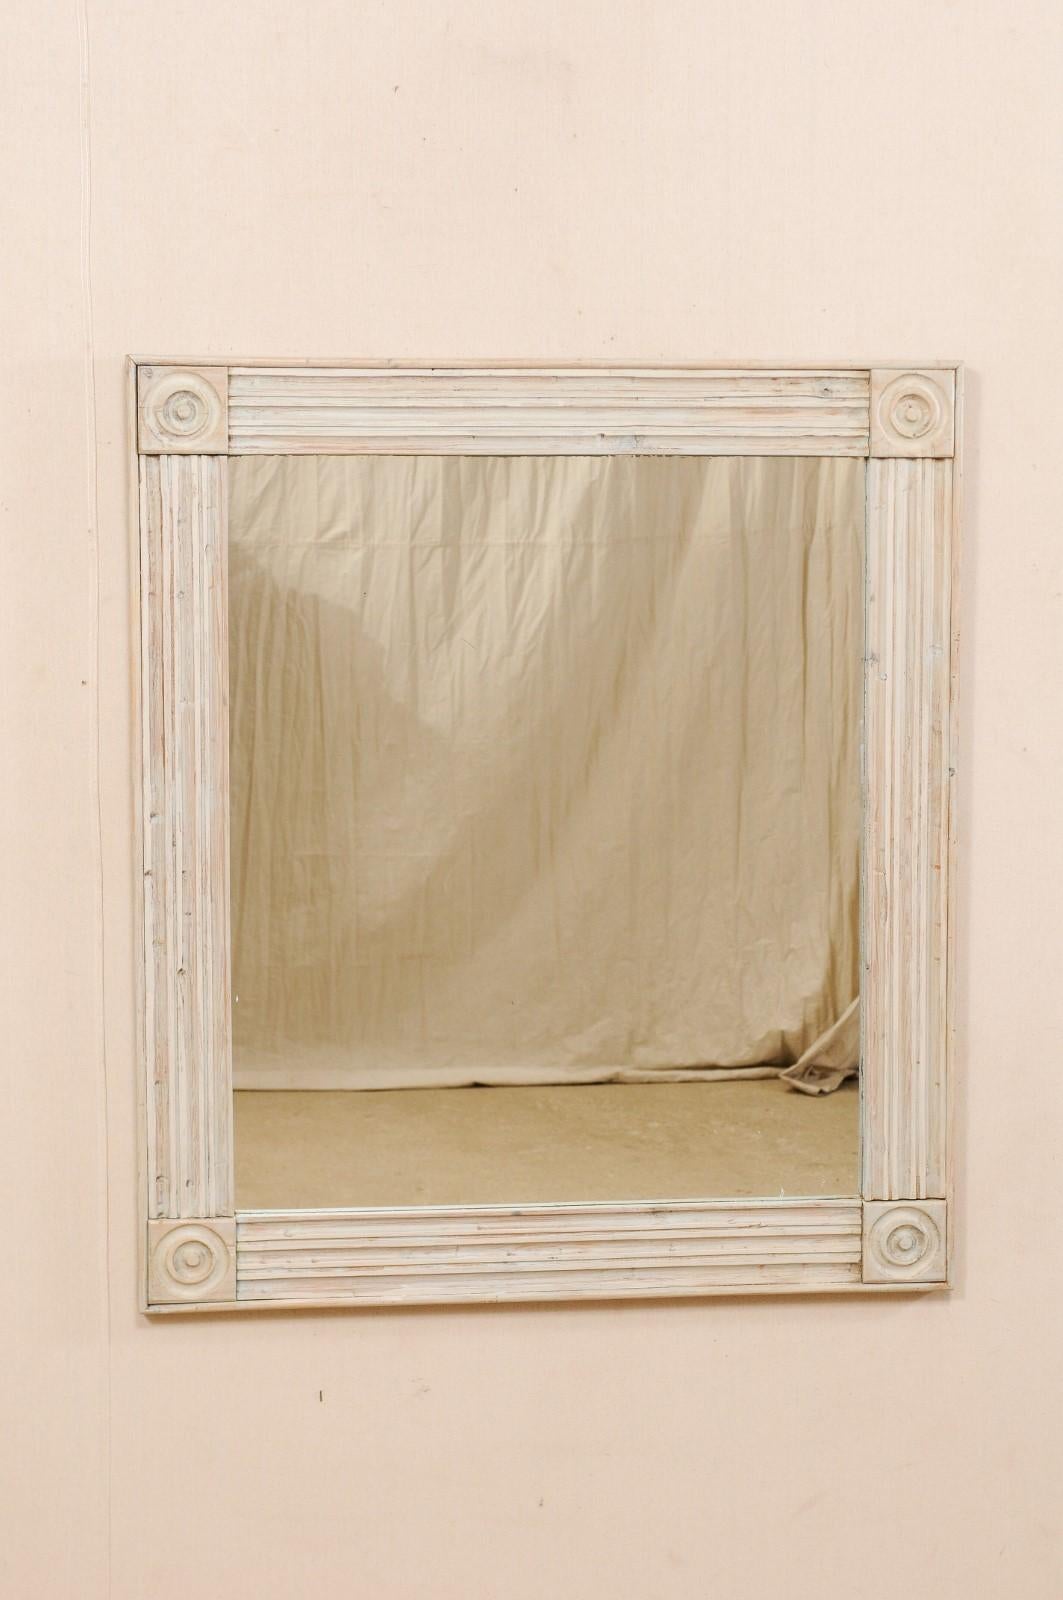 A vintage American carved and painted wooden mirror. This American mirror, from the mid-20th century, features a reeded wood surround which is accented at each corner with circular carved medallions. The mirror frame has a natural pale wood base